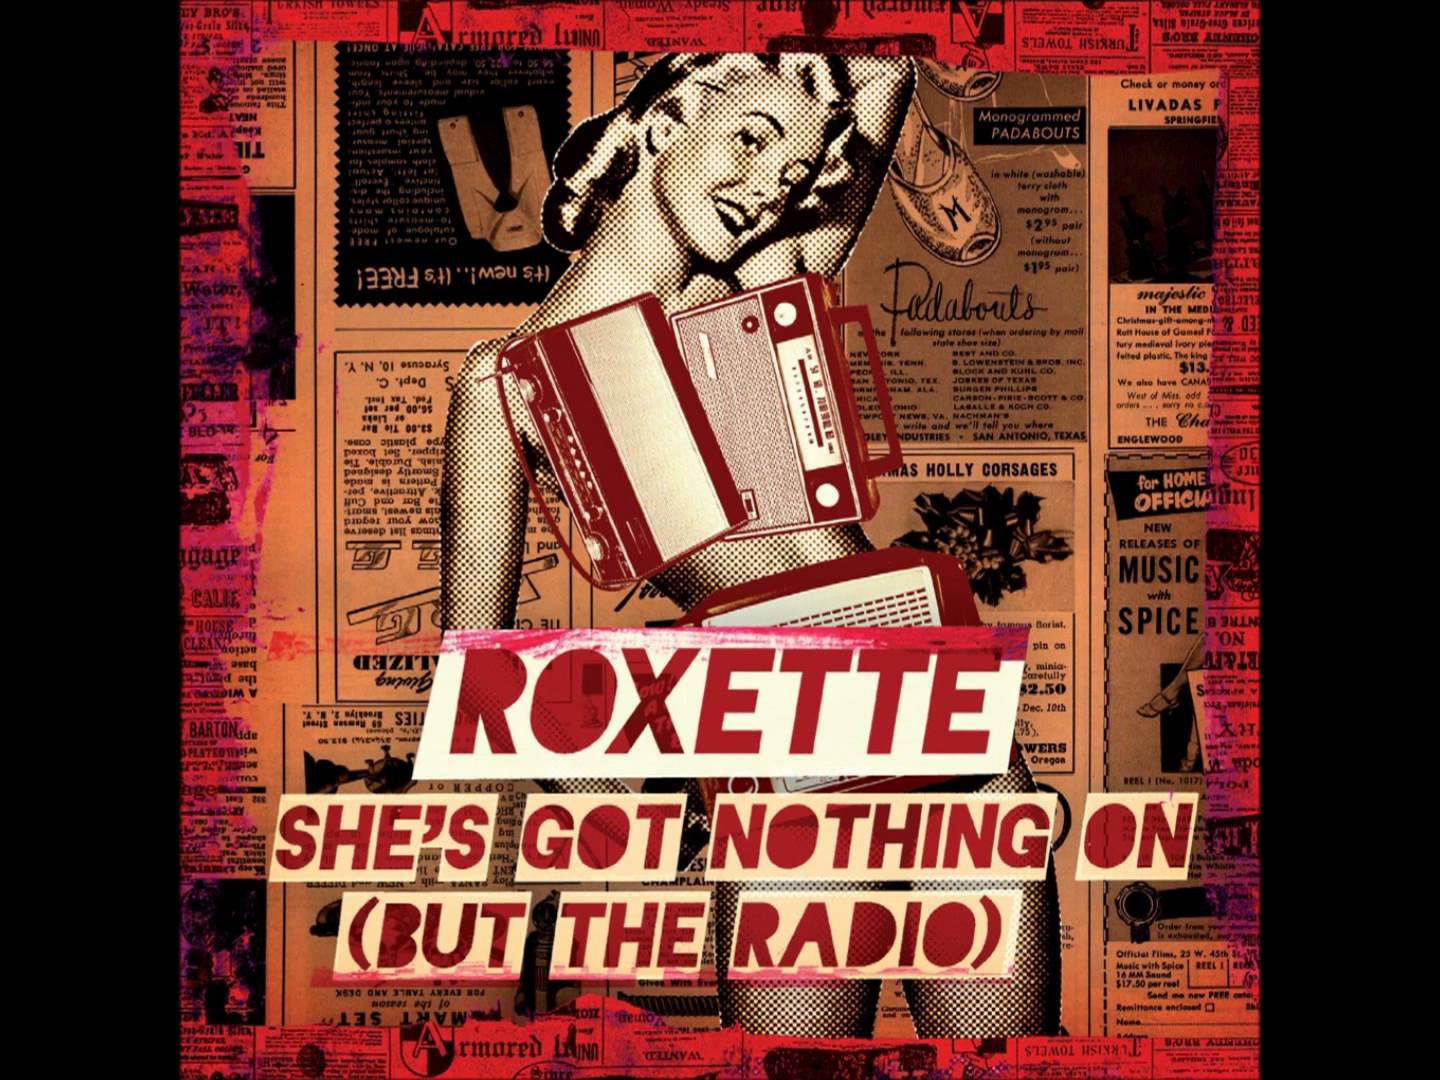 Roxette - She's Got Nothing on (But The Radio)